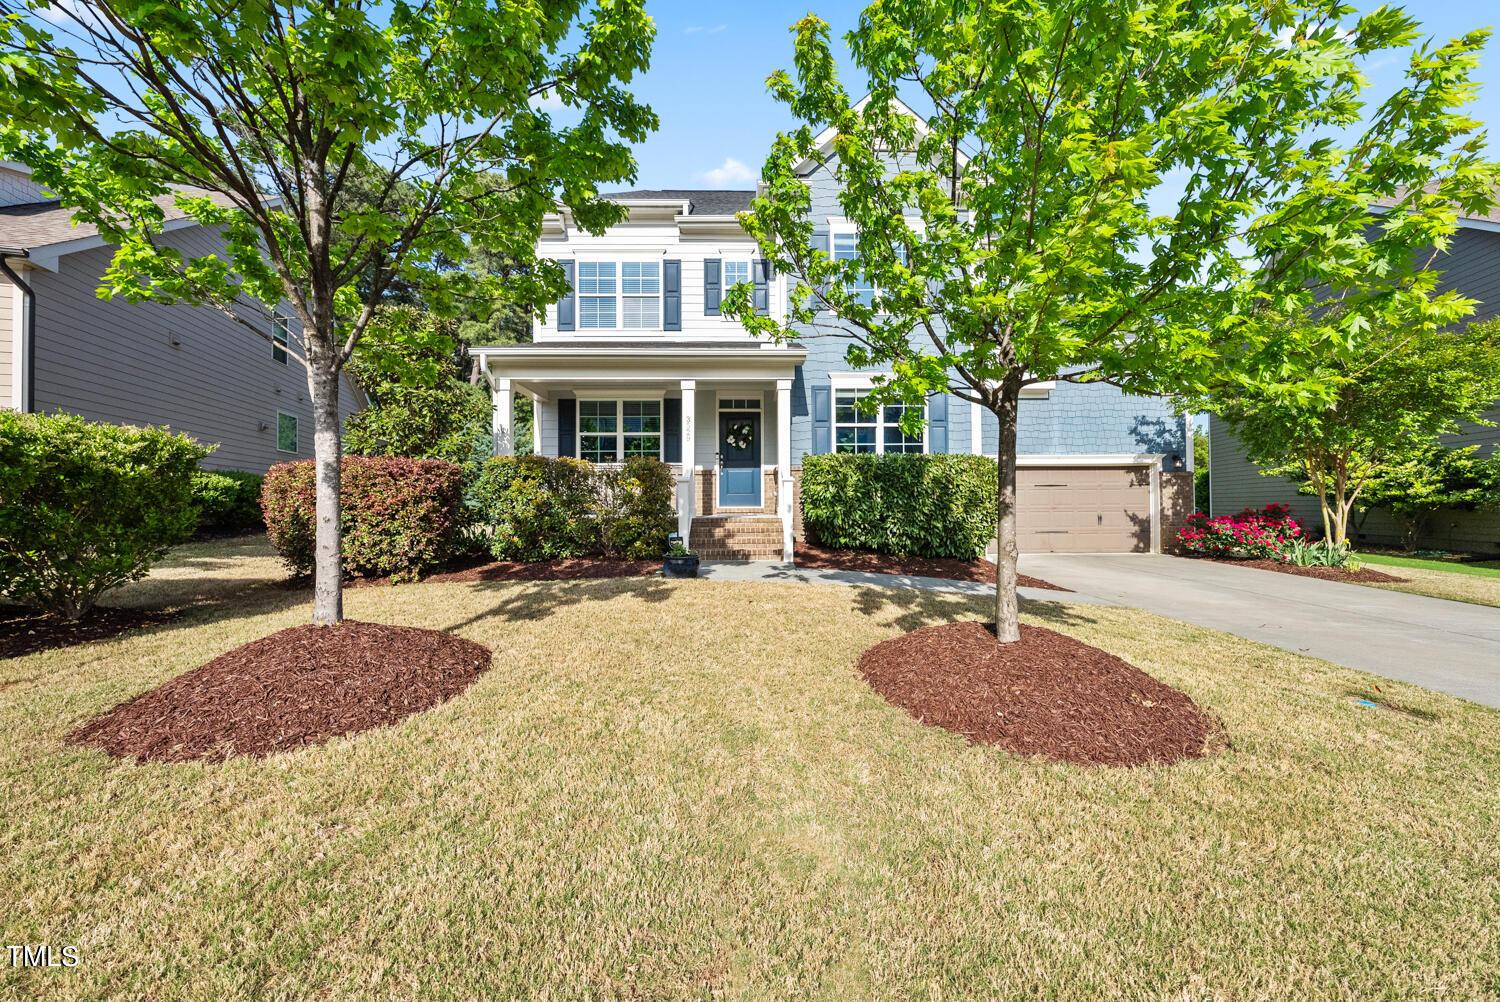 Photo one of 3529 Ogle Dr Cary NC 27518 | MLS 10025142